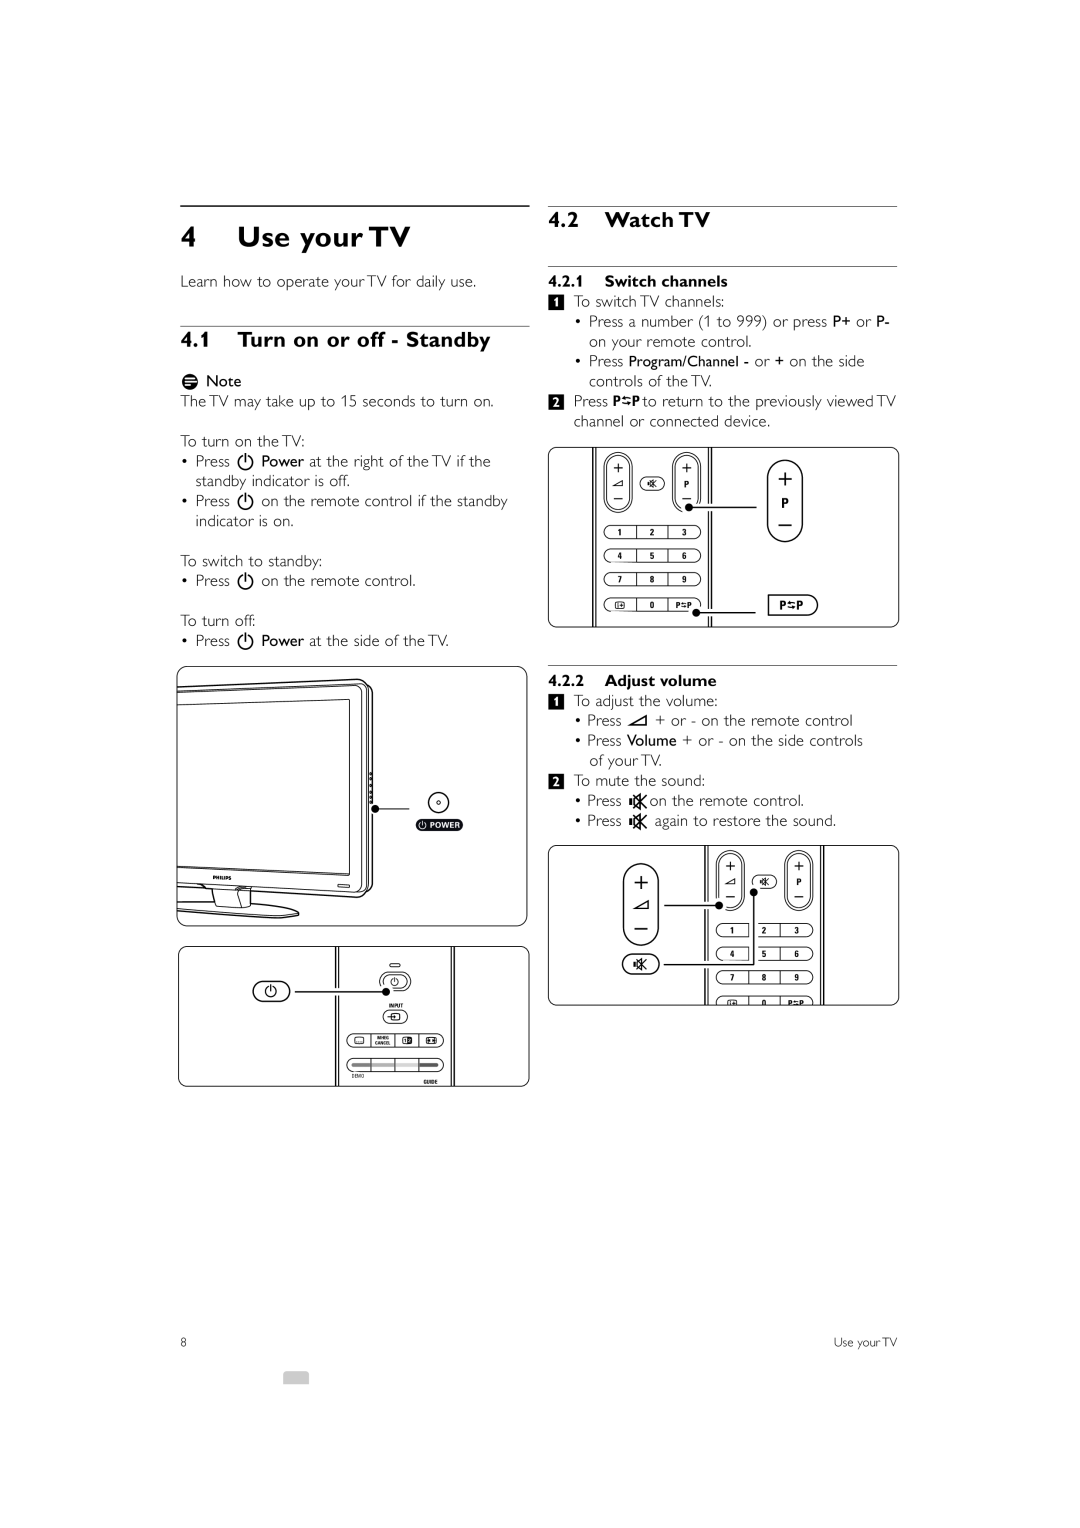 Philips 42PFL7423, 42PFL7433 manual Use your TV, Turn on or off - Standby, Watch TV, Switch channels, Adjust volume 